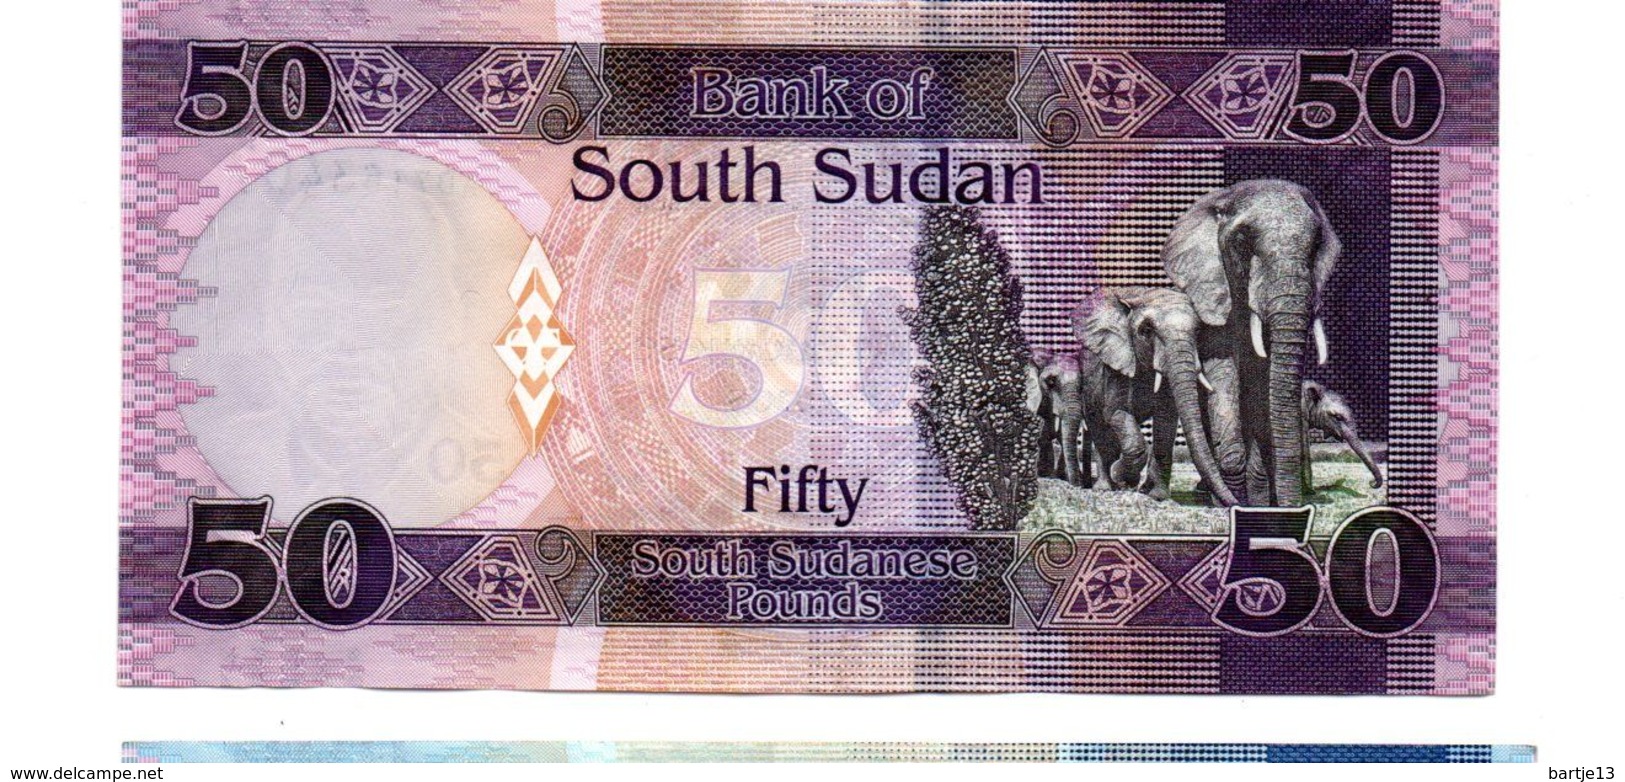 ZUID SOEDAN 50 SOUTH SUDANESE POUNDS PICK 14 UNCIRCULATED - South Sudan